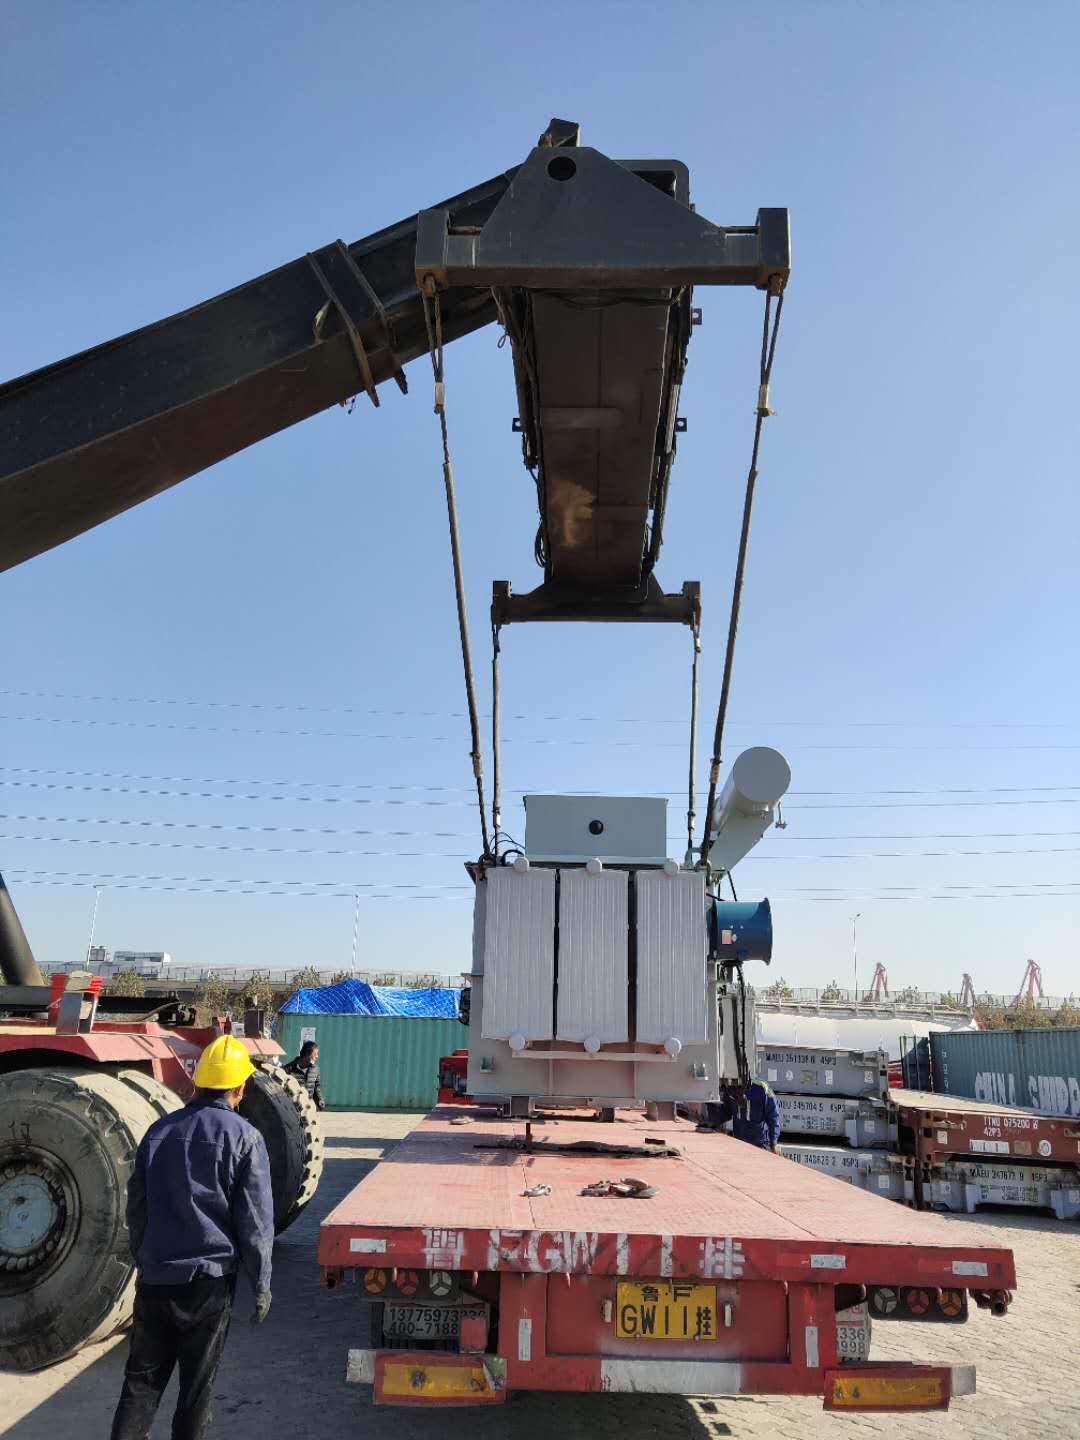  4500kva oil transformer exported to Indonesia